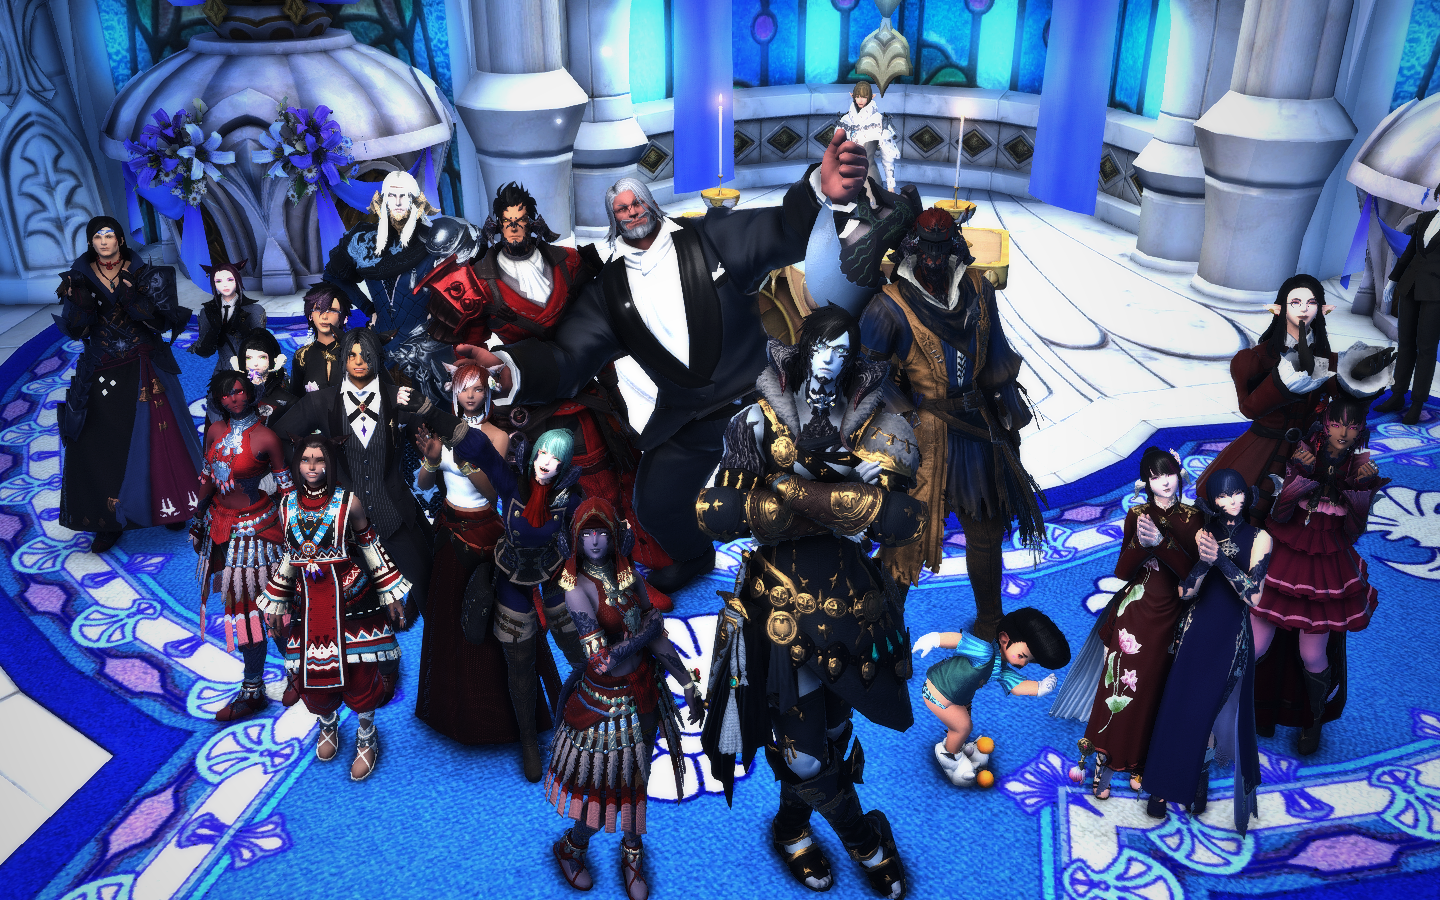 ffxiv_dx11 2018-10-13 16-25-26.png